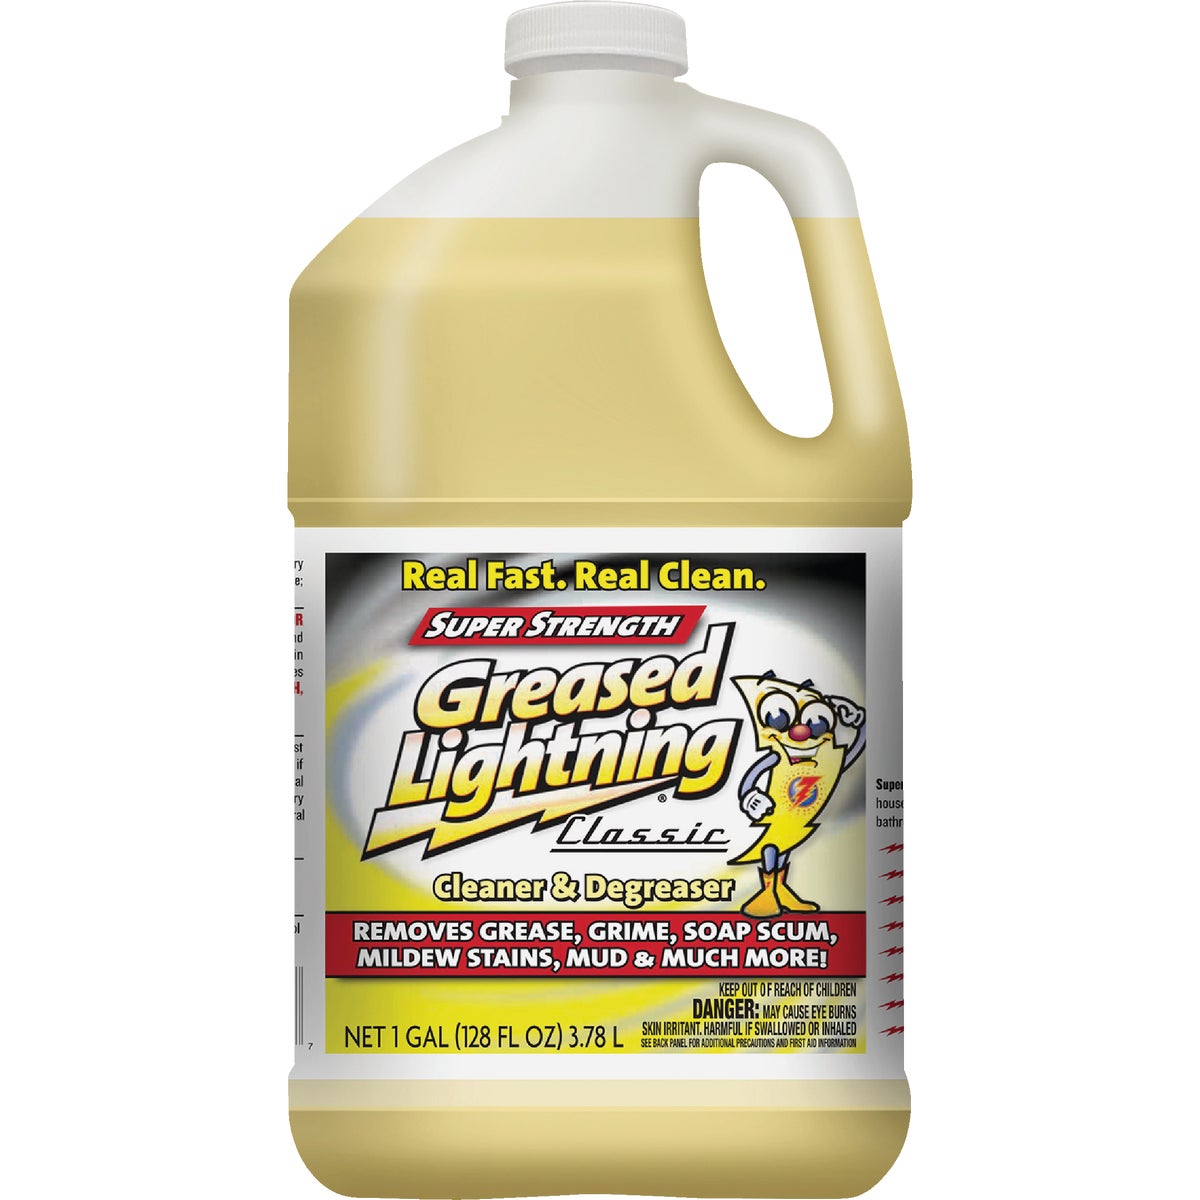 Greased Lightning 1 Gal. Classic Cleaner & Degreaser